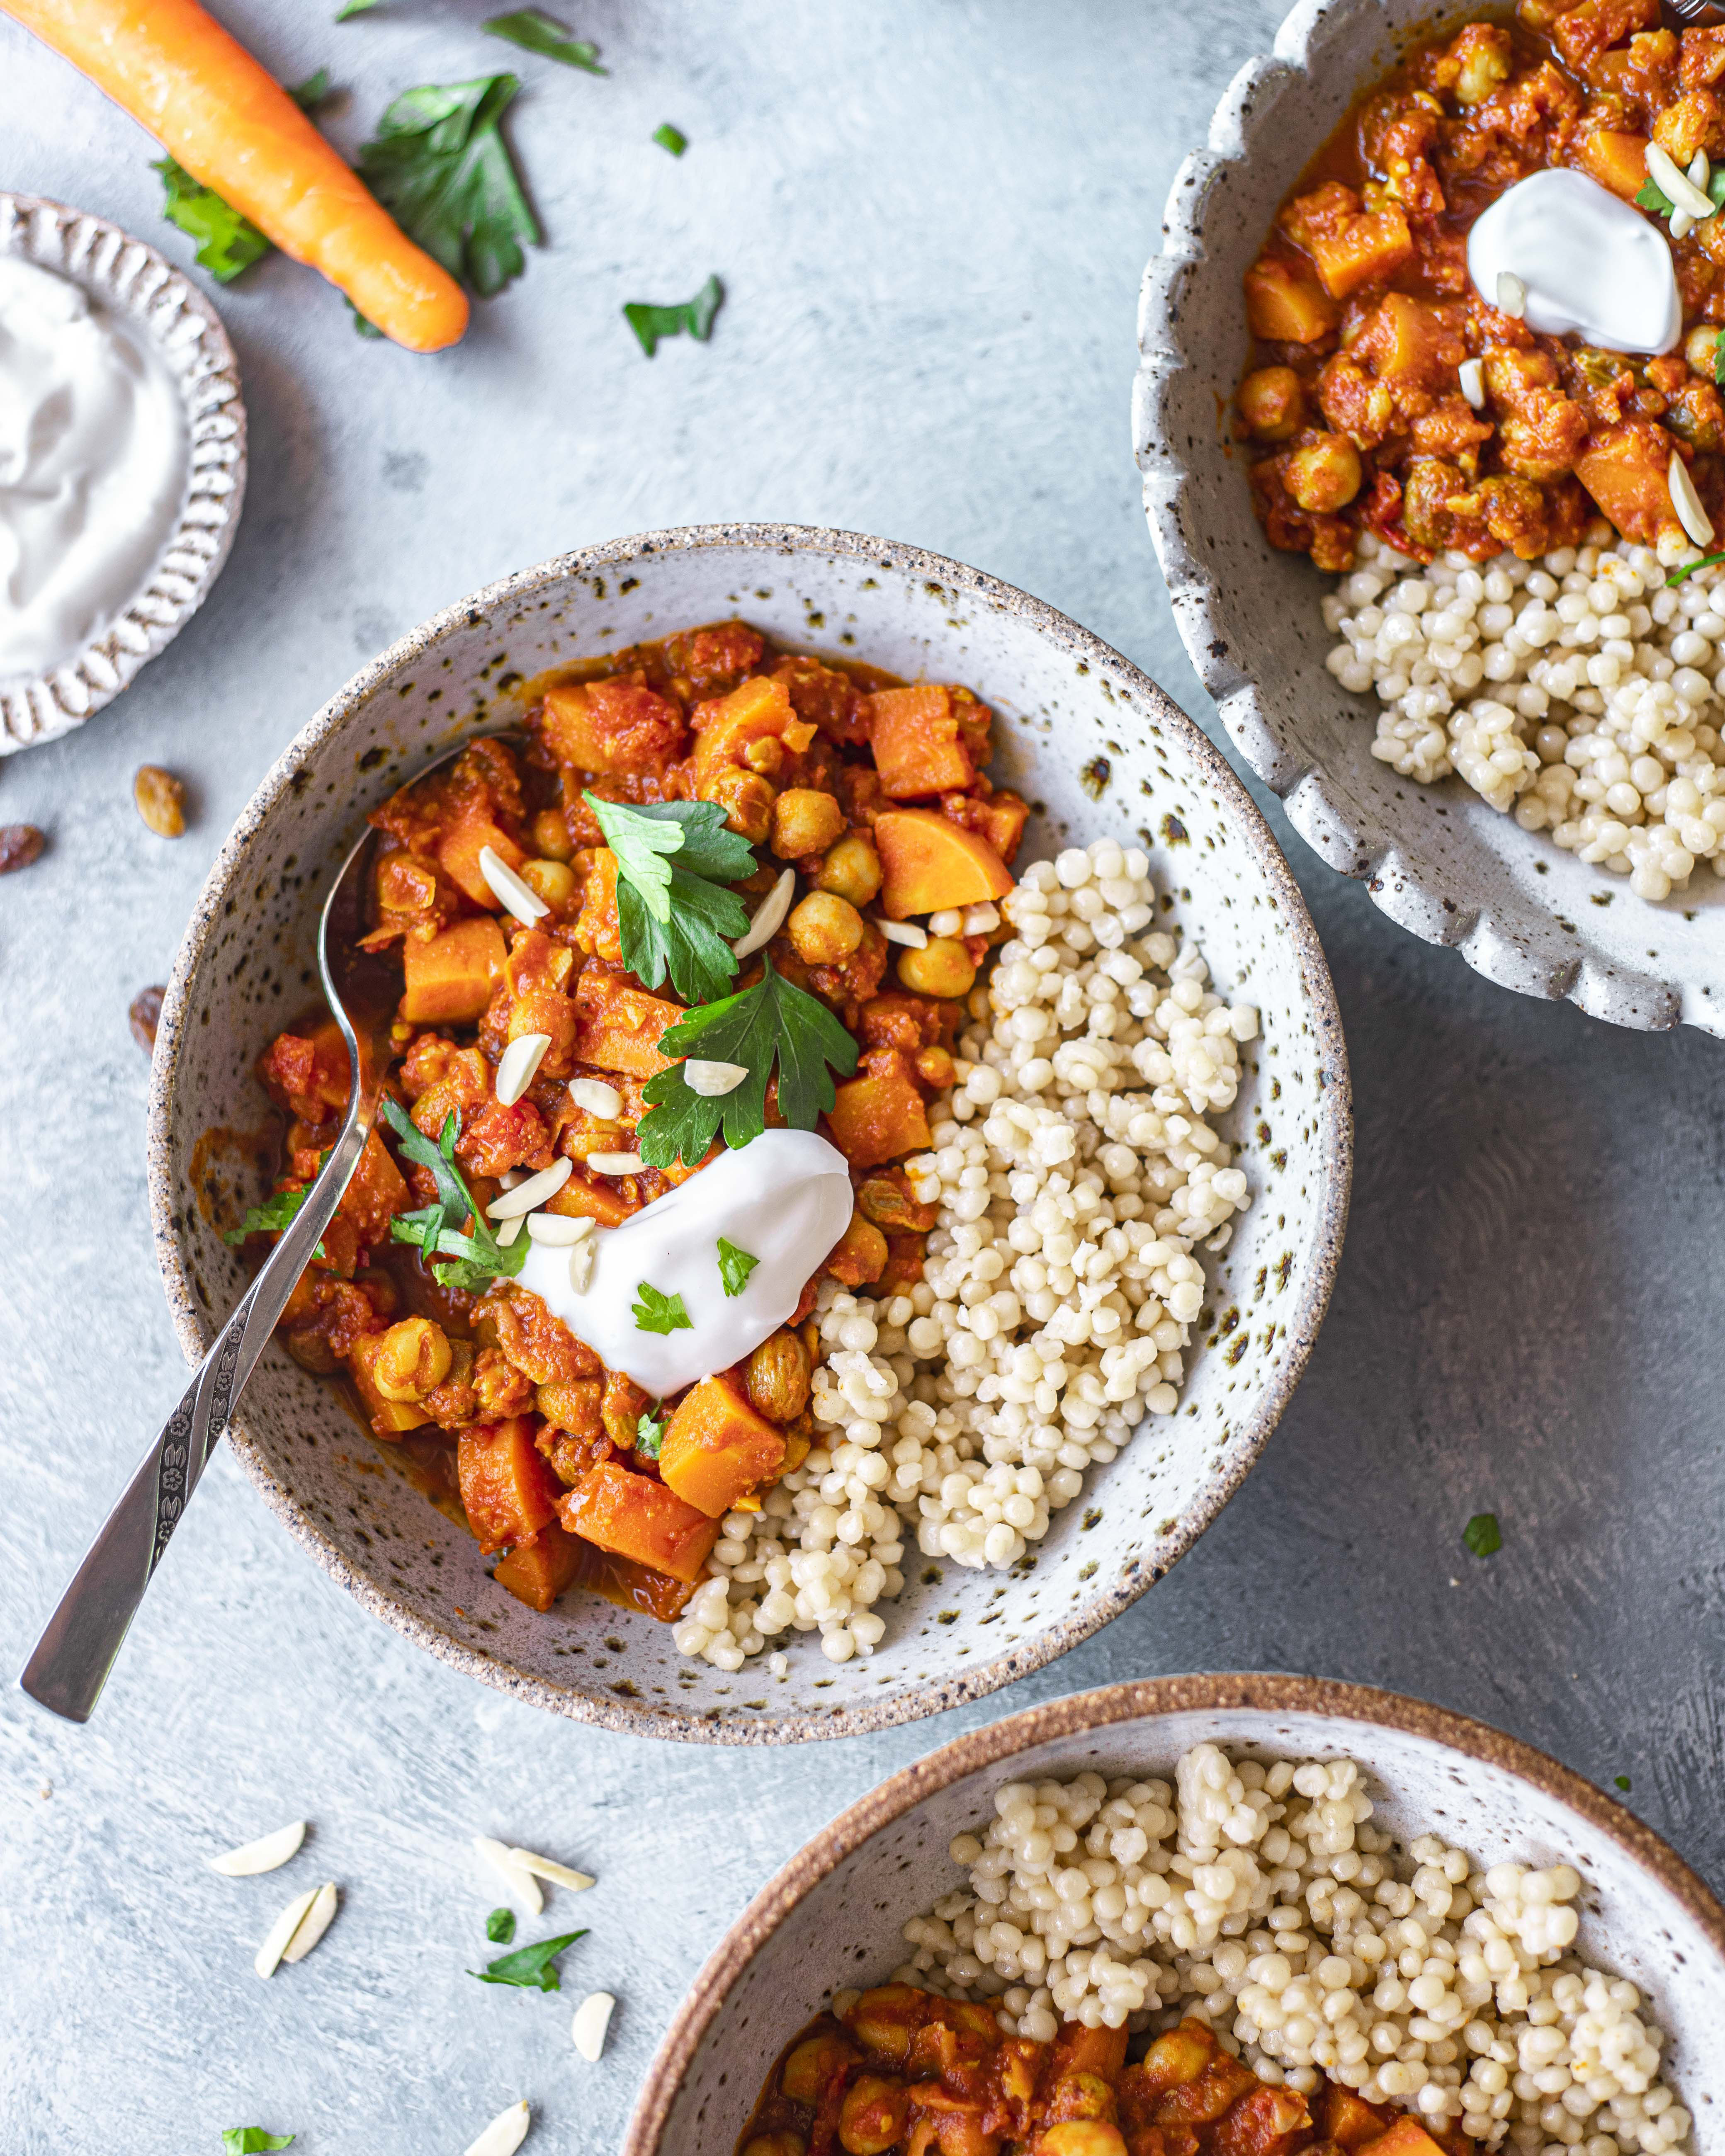 Easy Moroccan Chickpea Stew